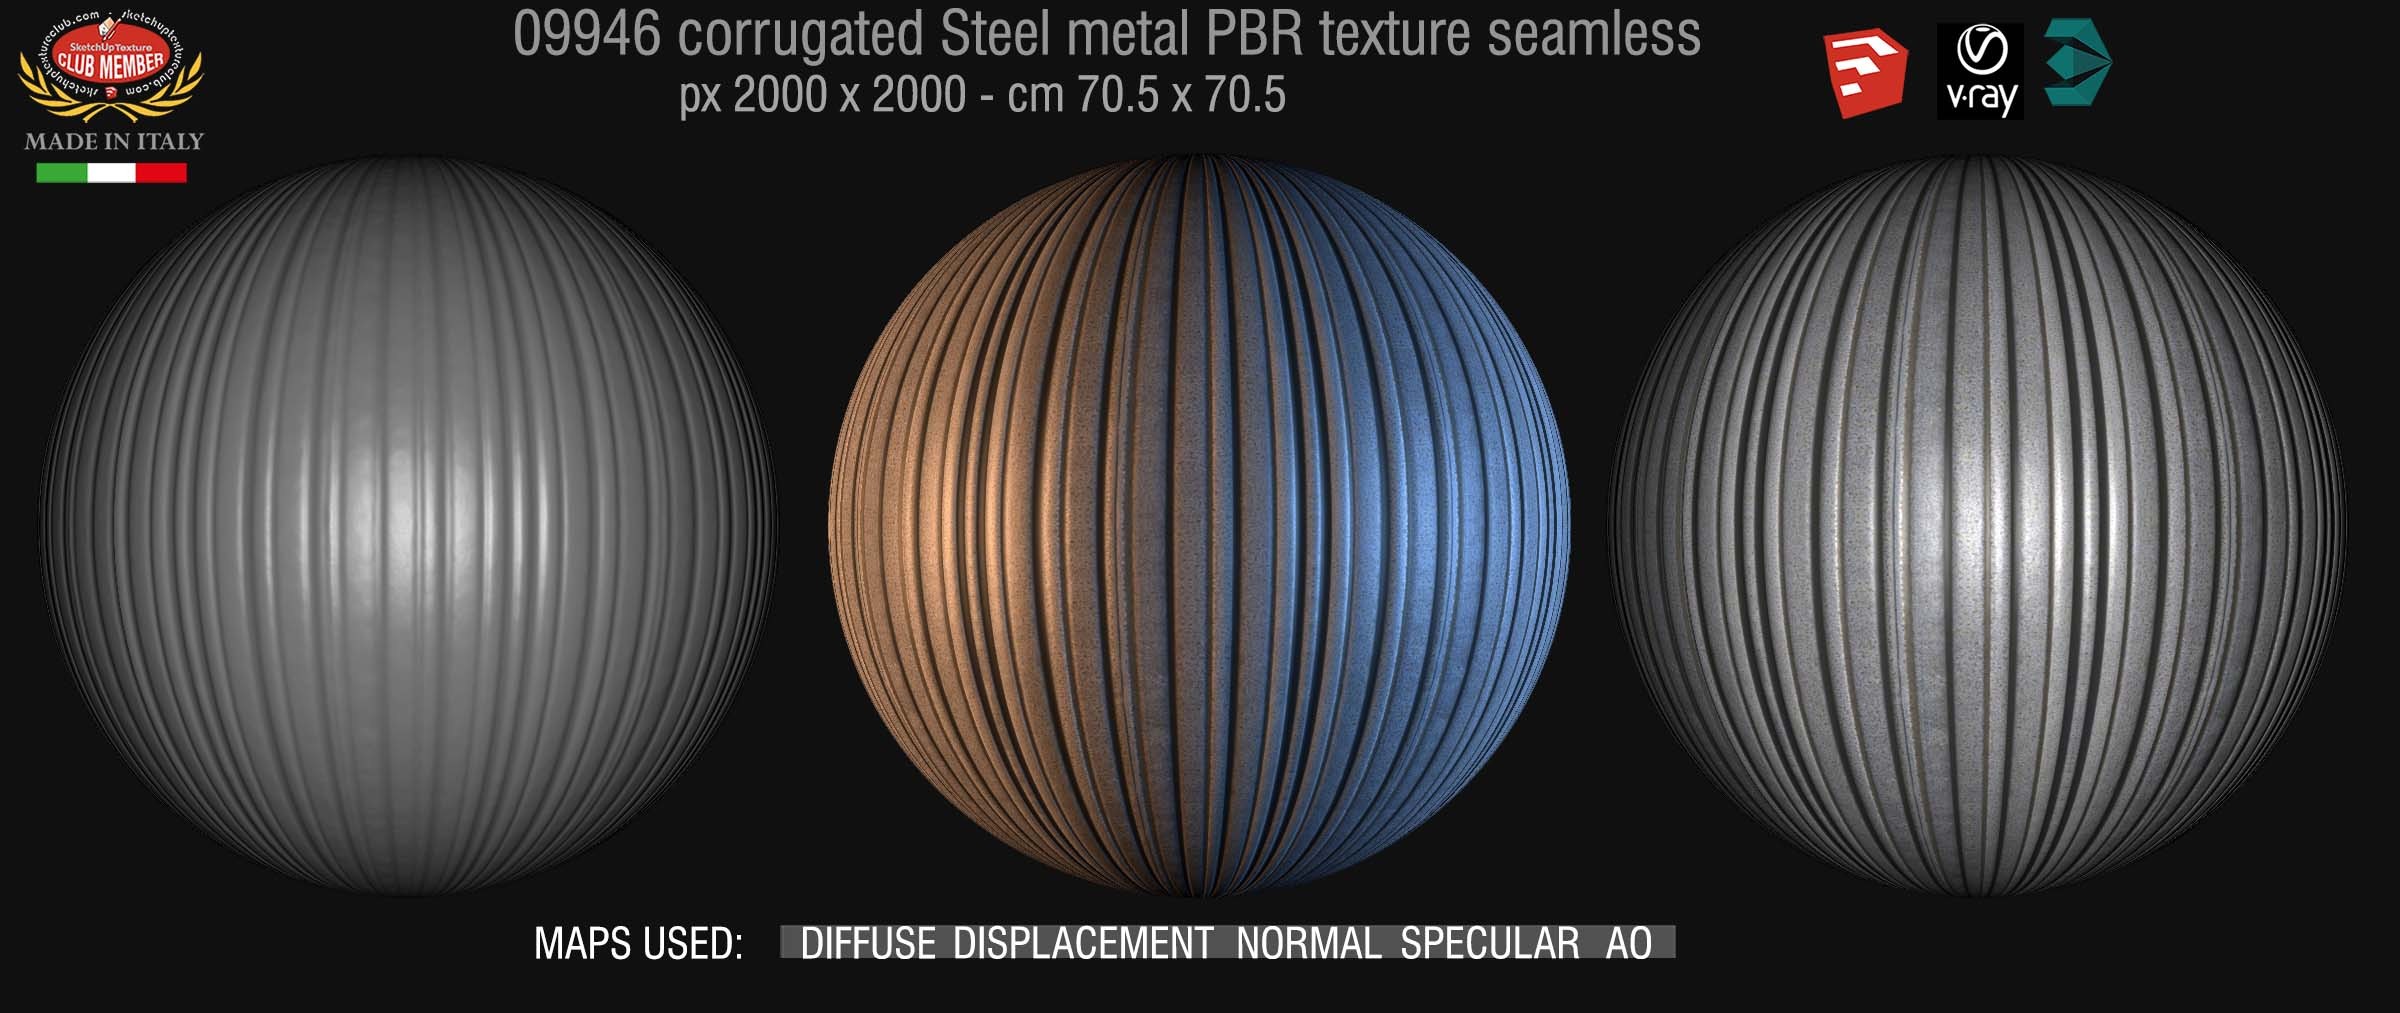 09946 Corrugated dirty steel PBR texture seamless DEMO